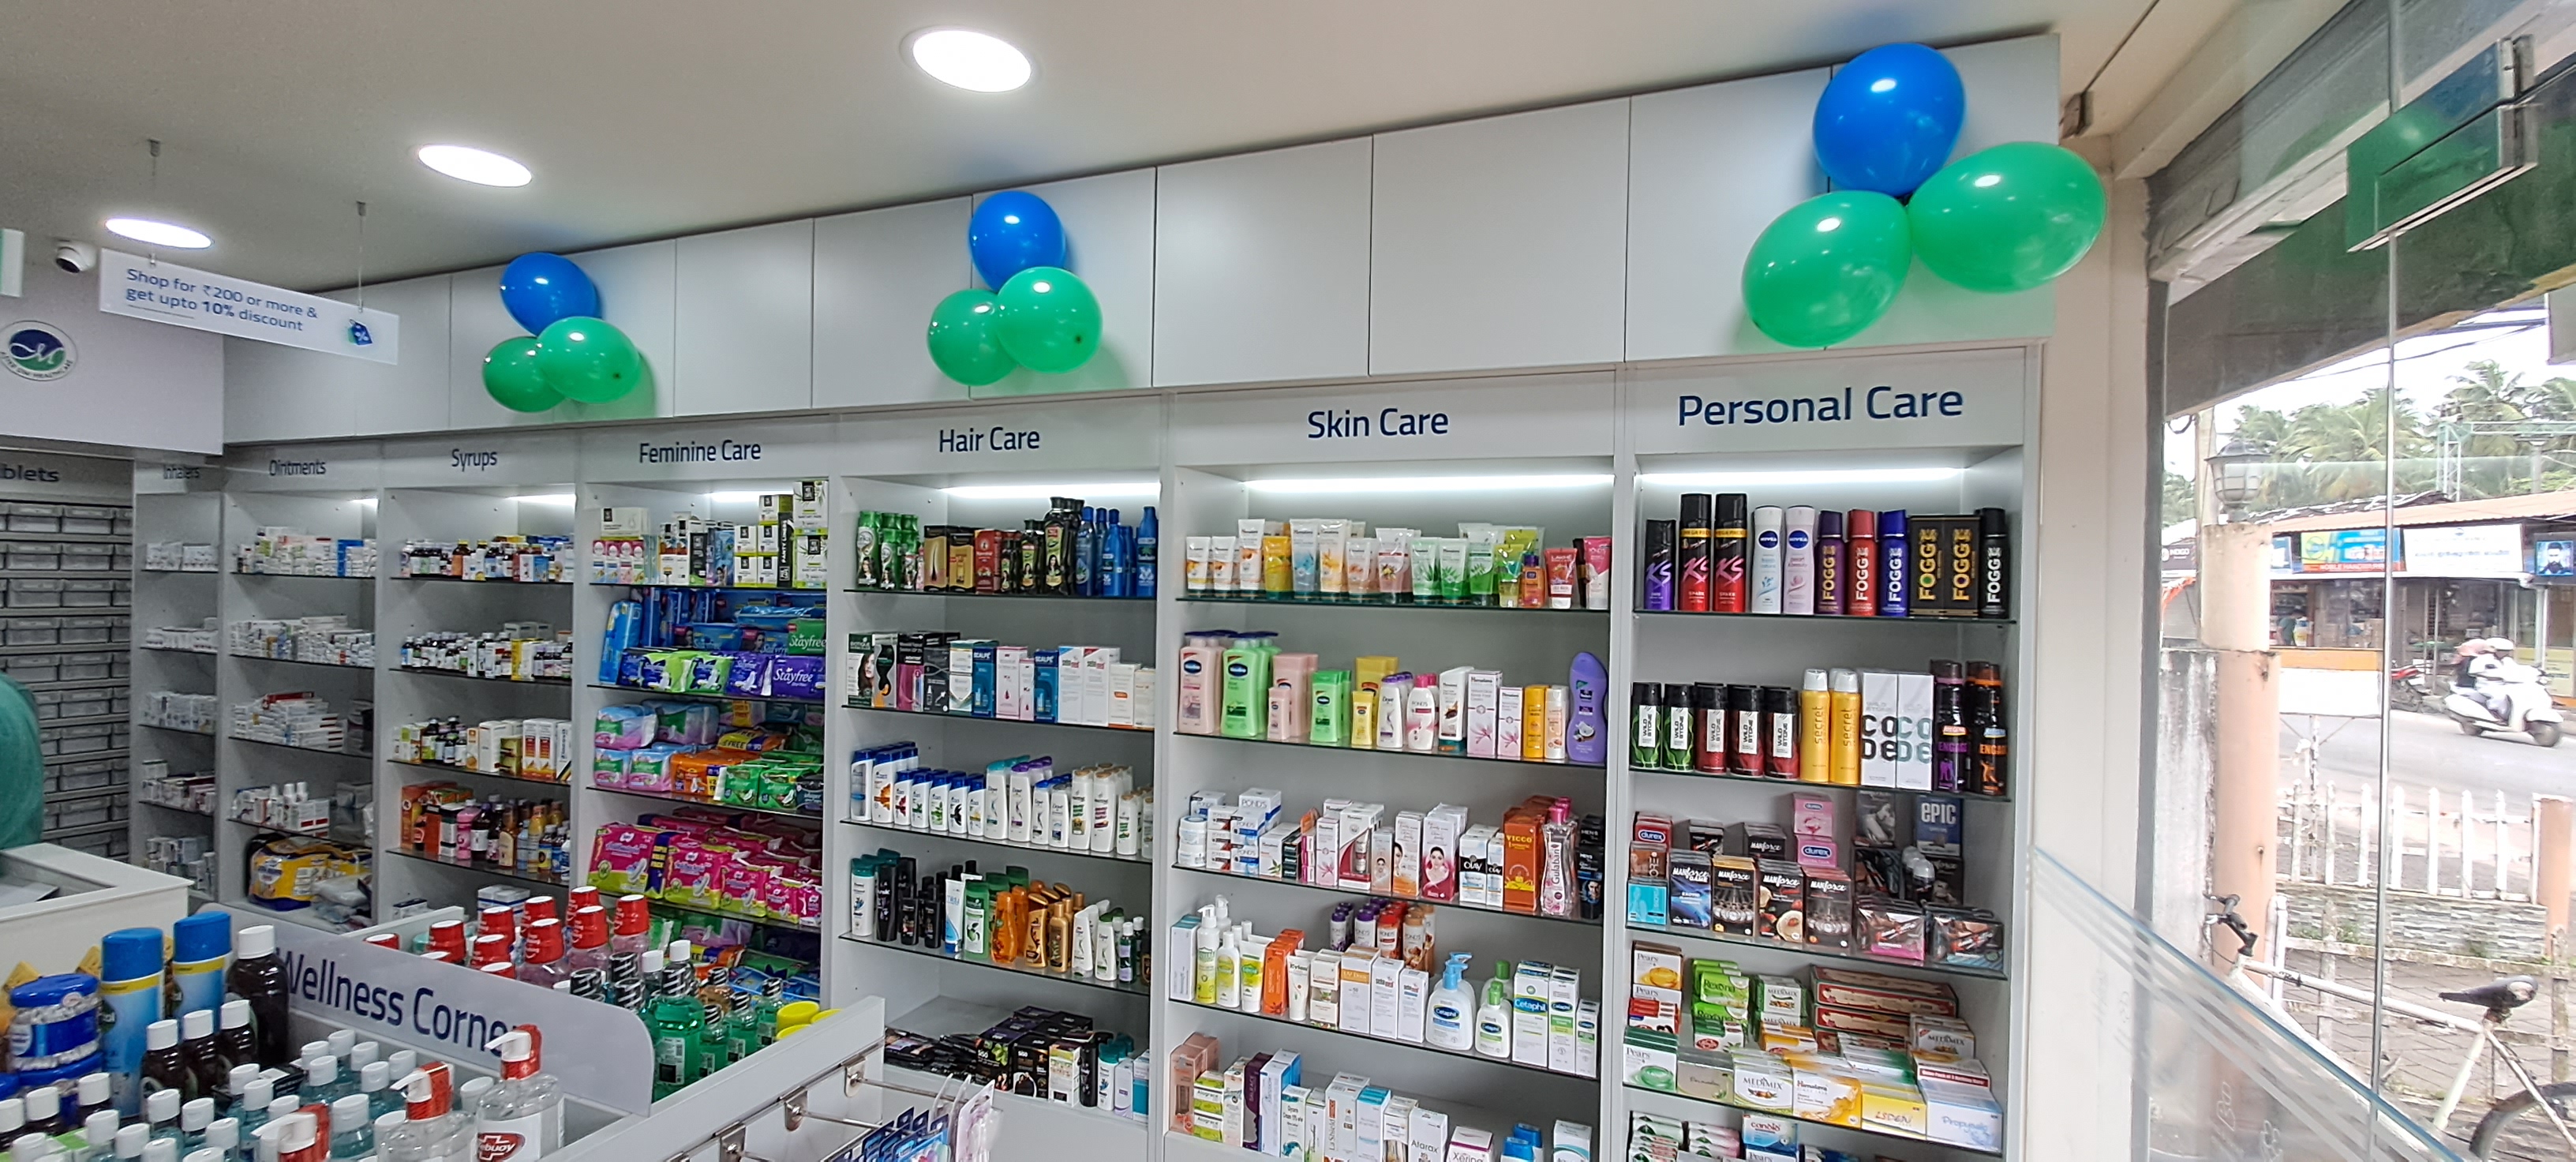 Aster Pharmacy in MCC, Davanagere